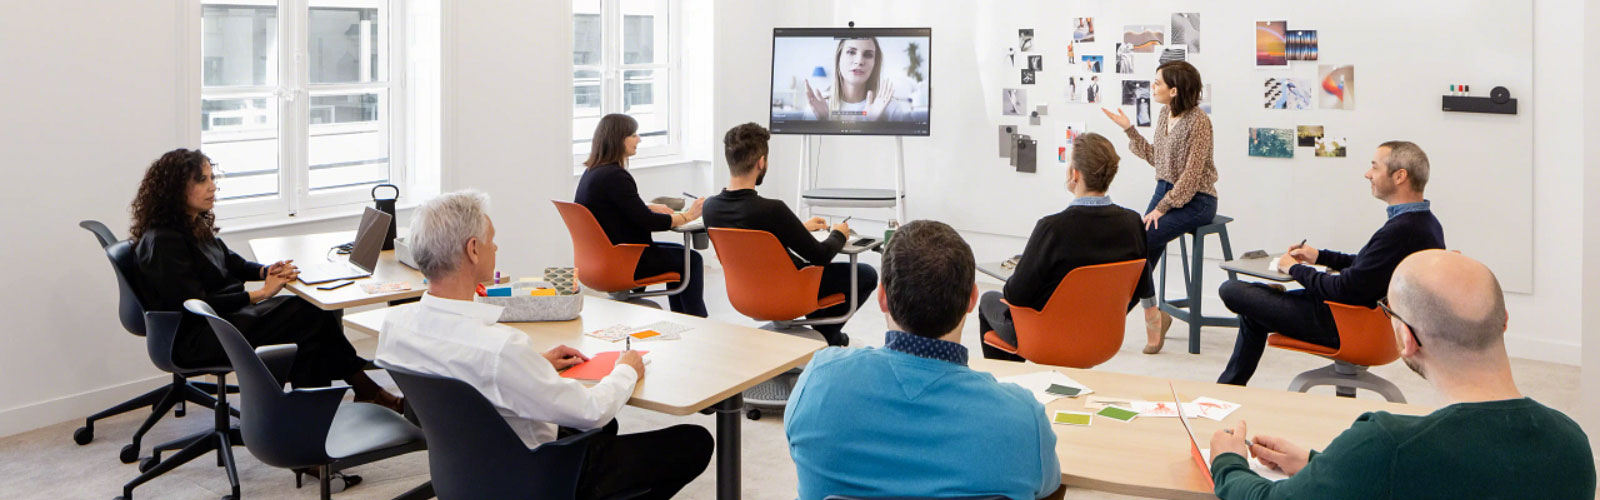 Office technology, video conference